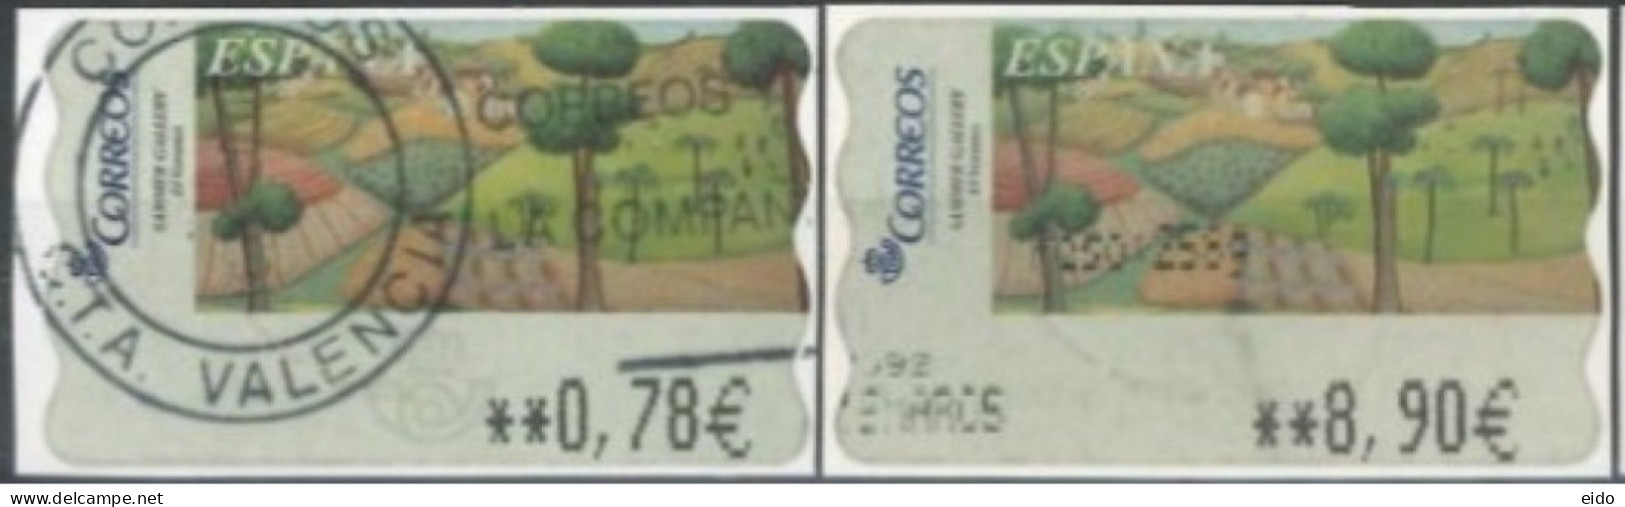 SPAIN - 2005 -  SAMER GALLERY, VERANO STAMPS LABELS SET OF 2 OF DIFFERENT VALUES, USED . - Used Stamps